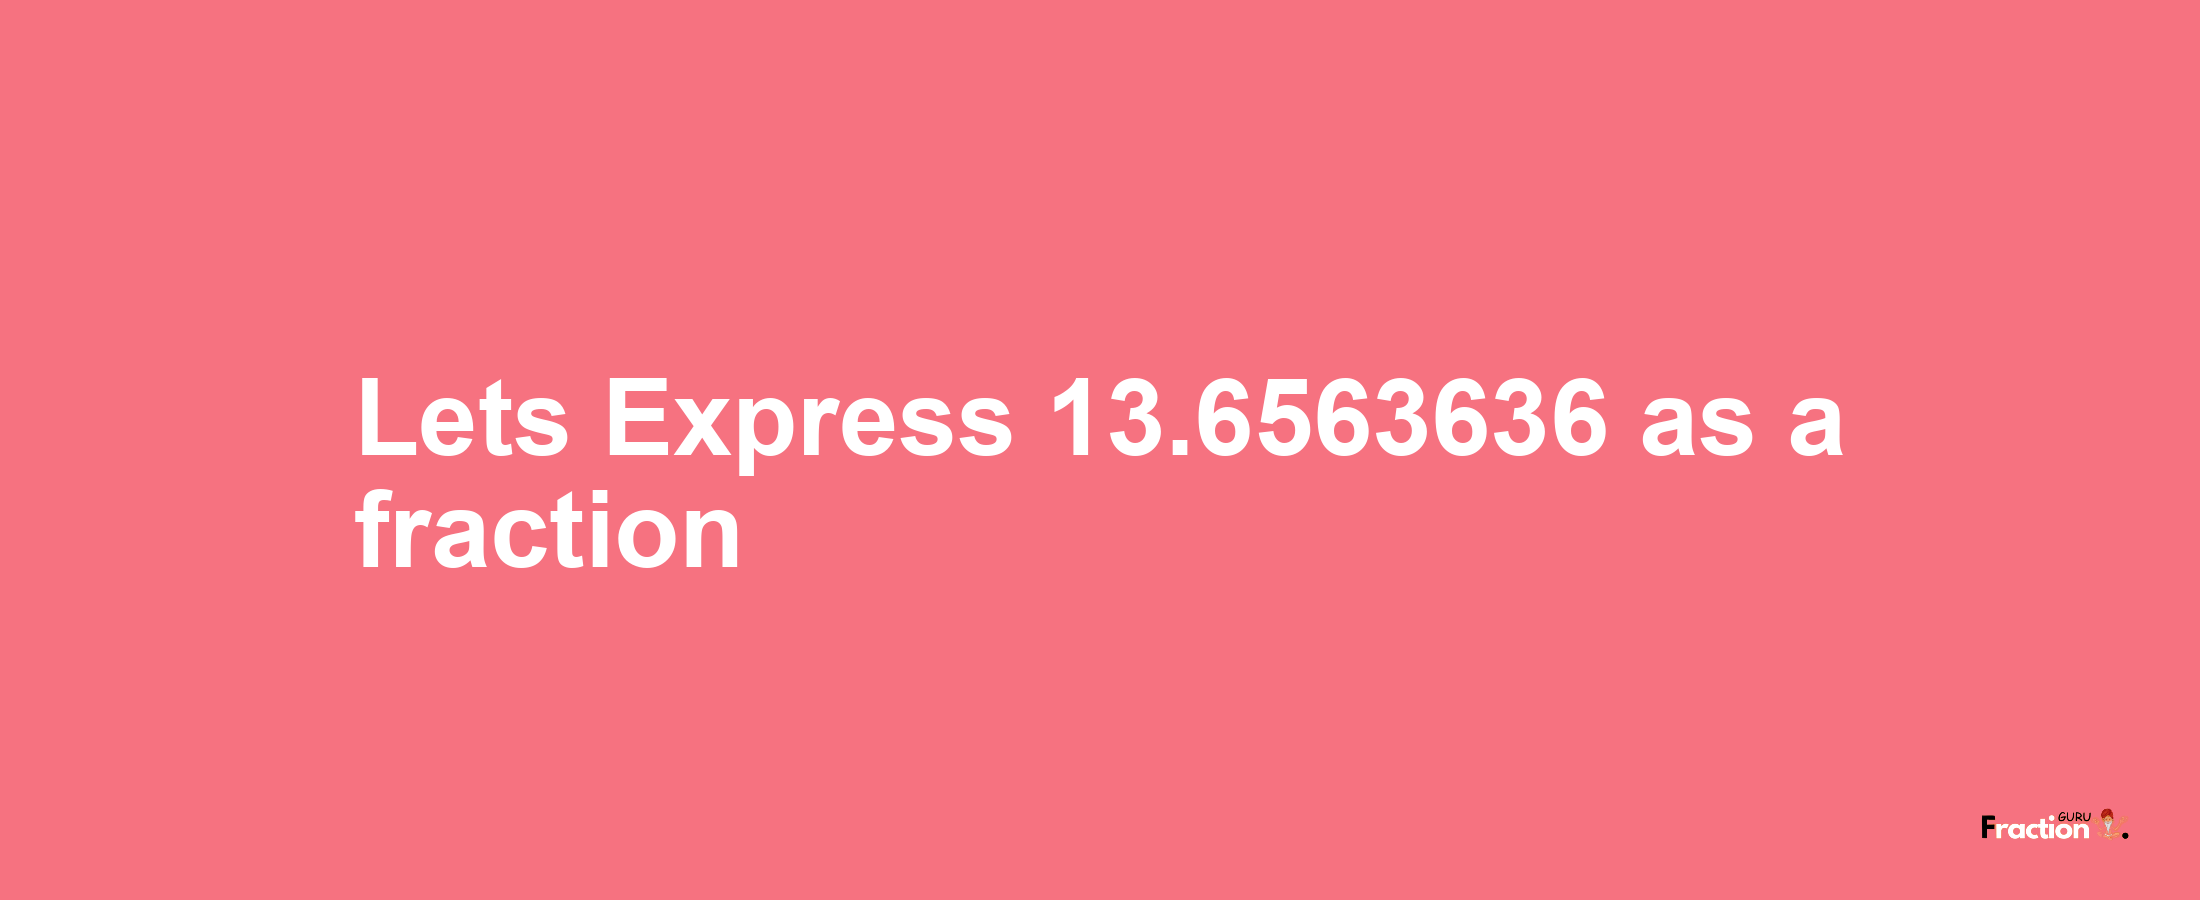 Lets Express 13.6563636 as afraction